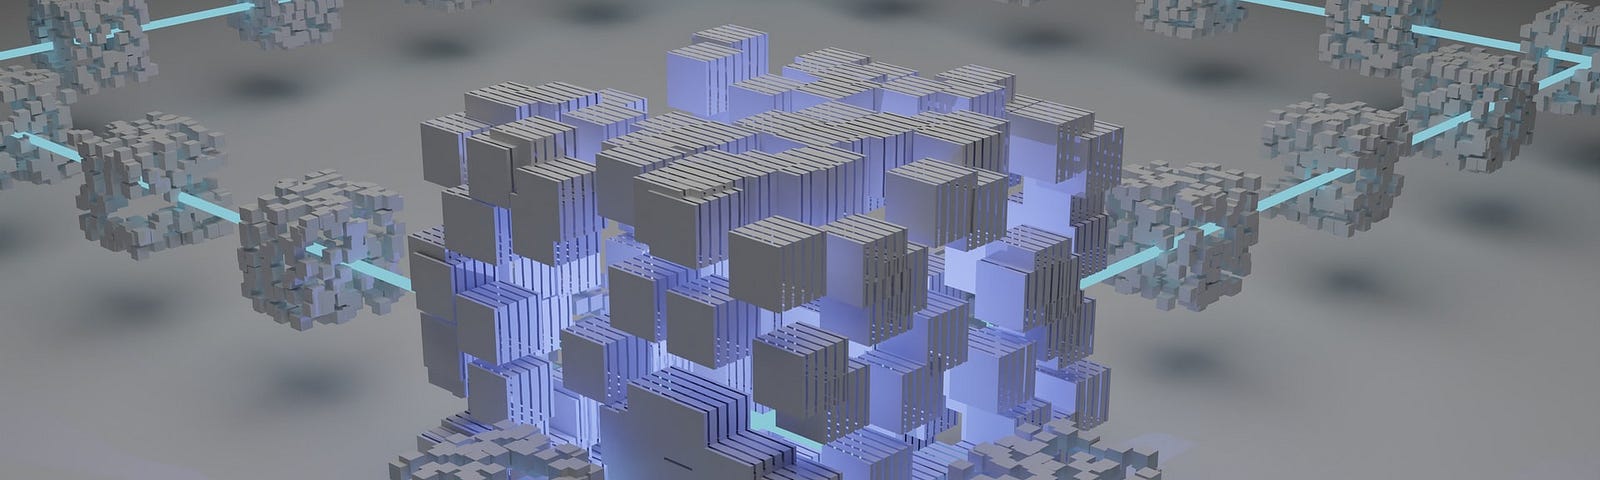 IMAGE: A network of interconnected, loosely formed grey tridimensional cubes symbolizing the blockchain and decentralized finance